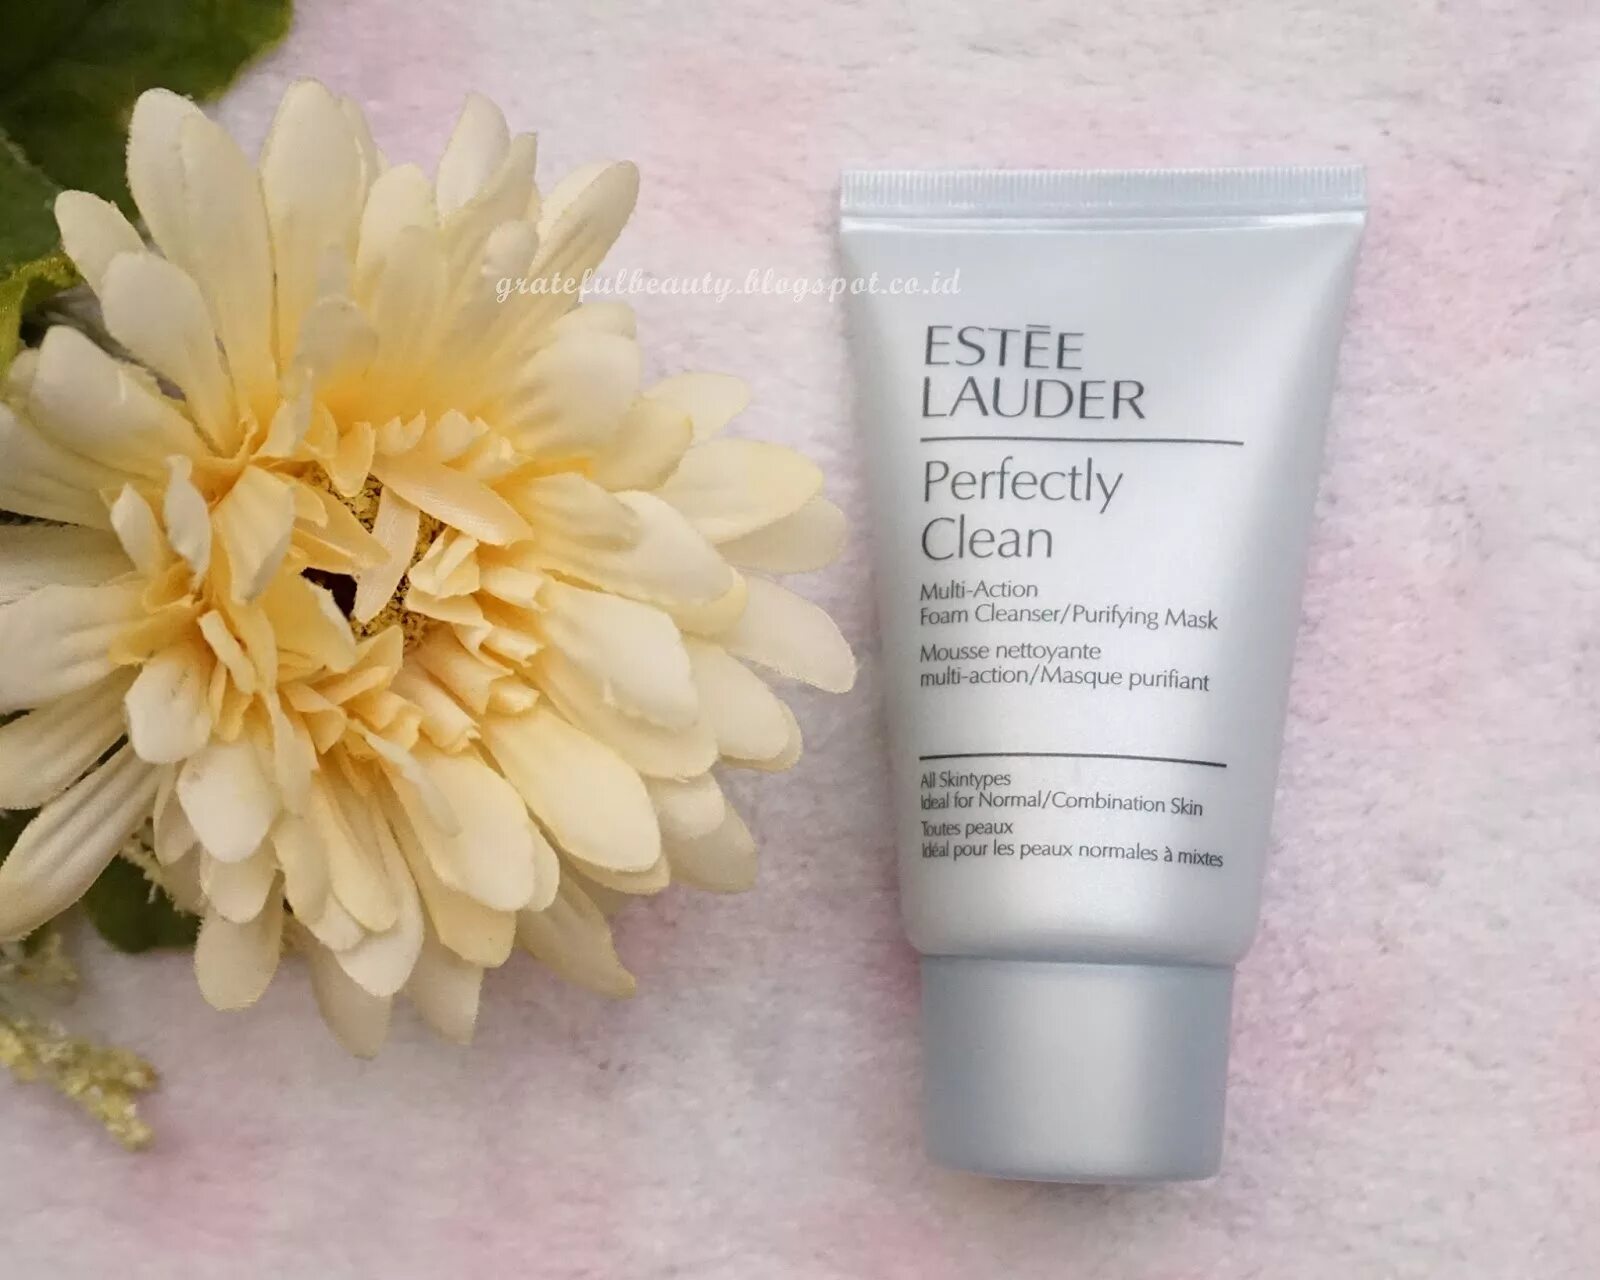 Purifying cleanser foam. Эсте лаудер perfectly clean Multi-Action Foam Cleanser/Purifying Mask. Estee Lauder perfectly clean Splash away Foaming Cleanser. Estee Lauder Hydrationist Foam Cleanser. Estee Lauder пенка super.